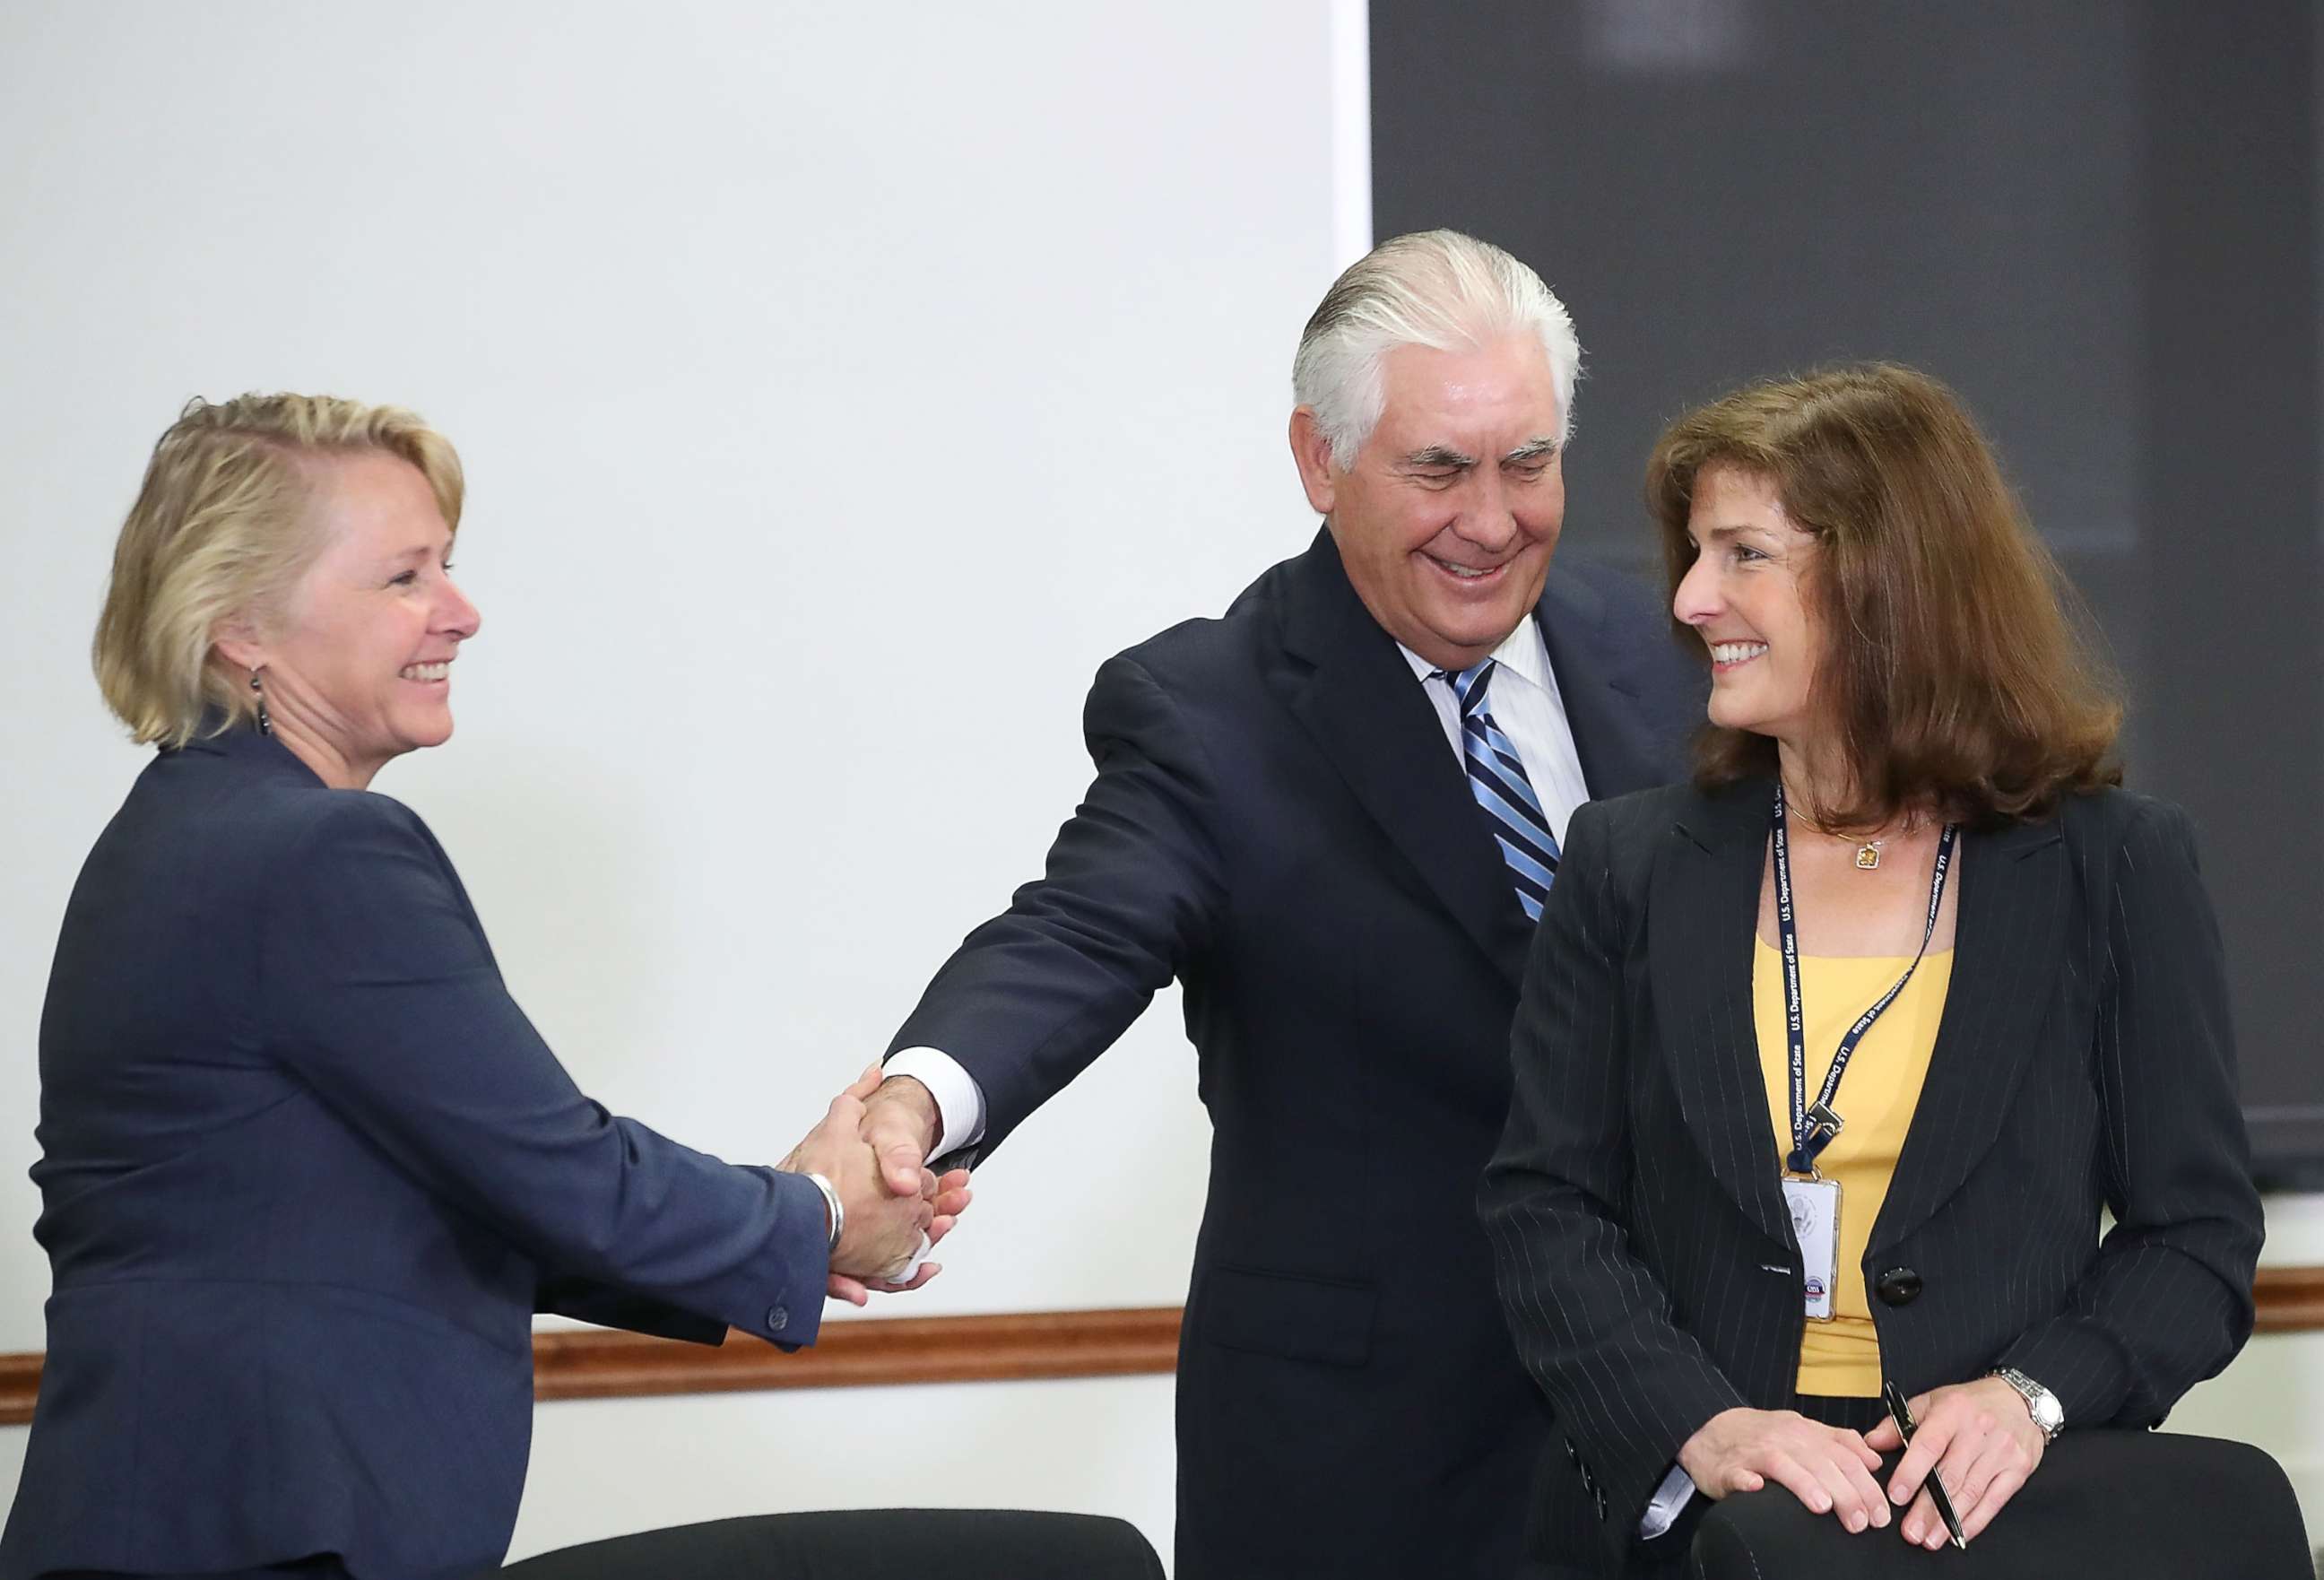 PHOTO: Secretary of State Rex Tillerson shakes hands with Susan Thornton (L), Principal Deputy Assistant Secretary during a meeting of the U.S.-Japan Security Consultative Committee at the State Department, Aug. 17, 2017, in Washington, D.C.  